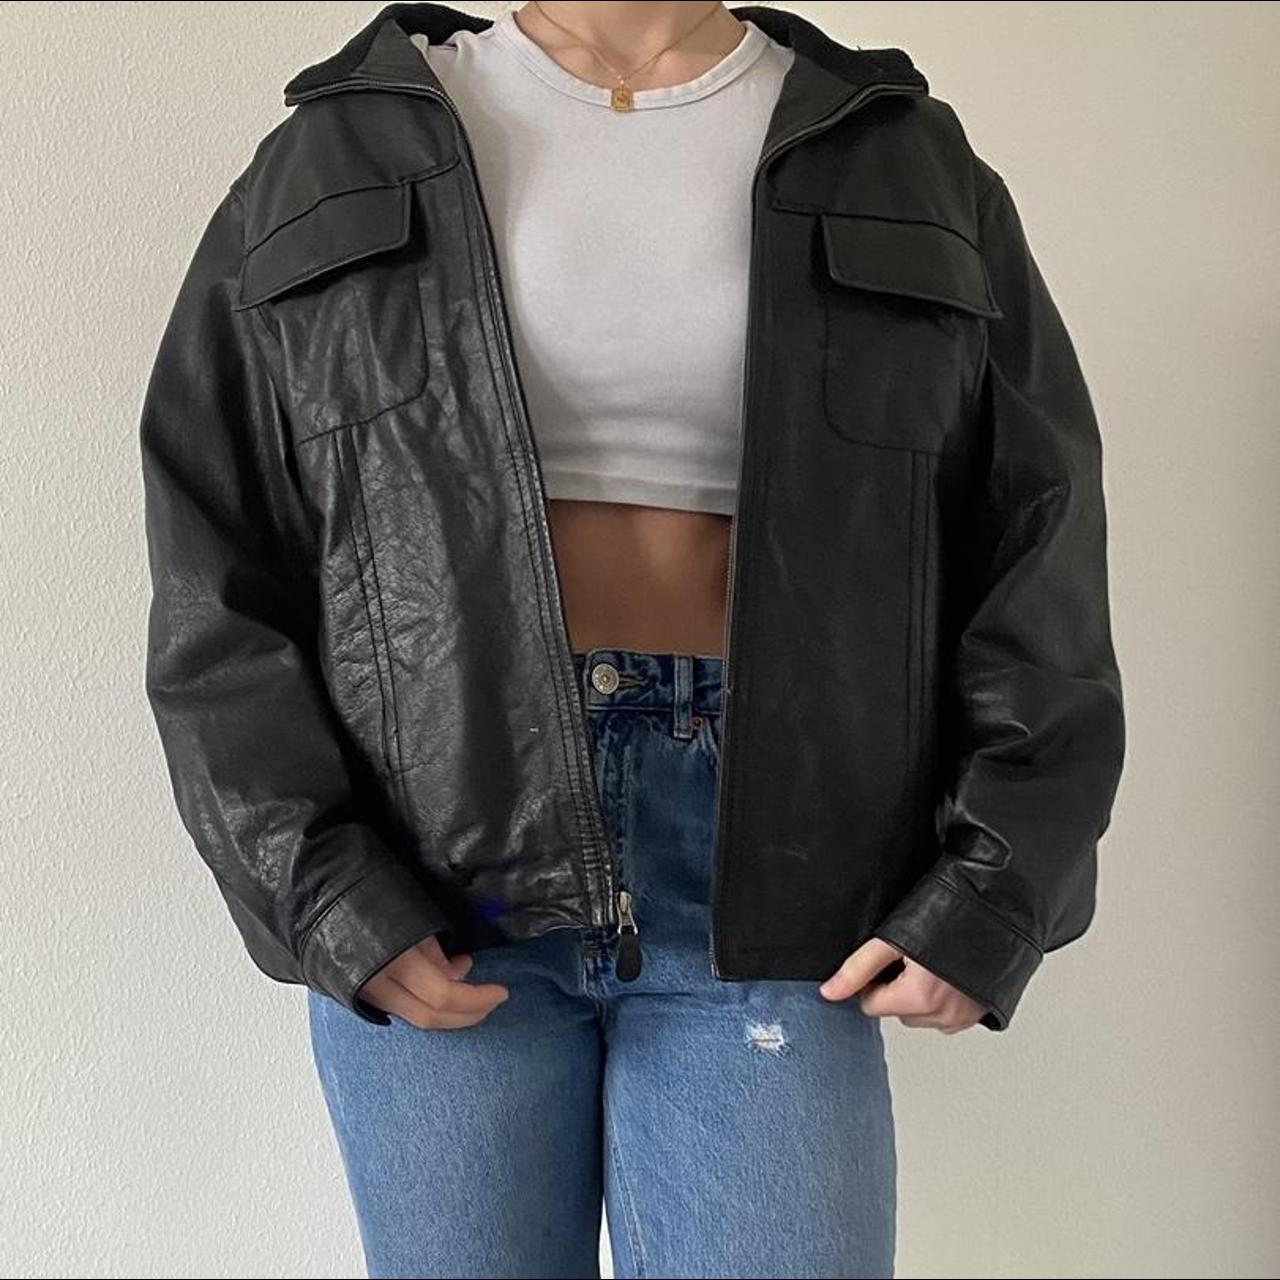 Beautiful St. John’s Bay Leather Jacket with... - Depop